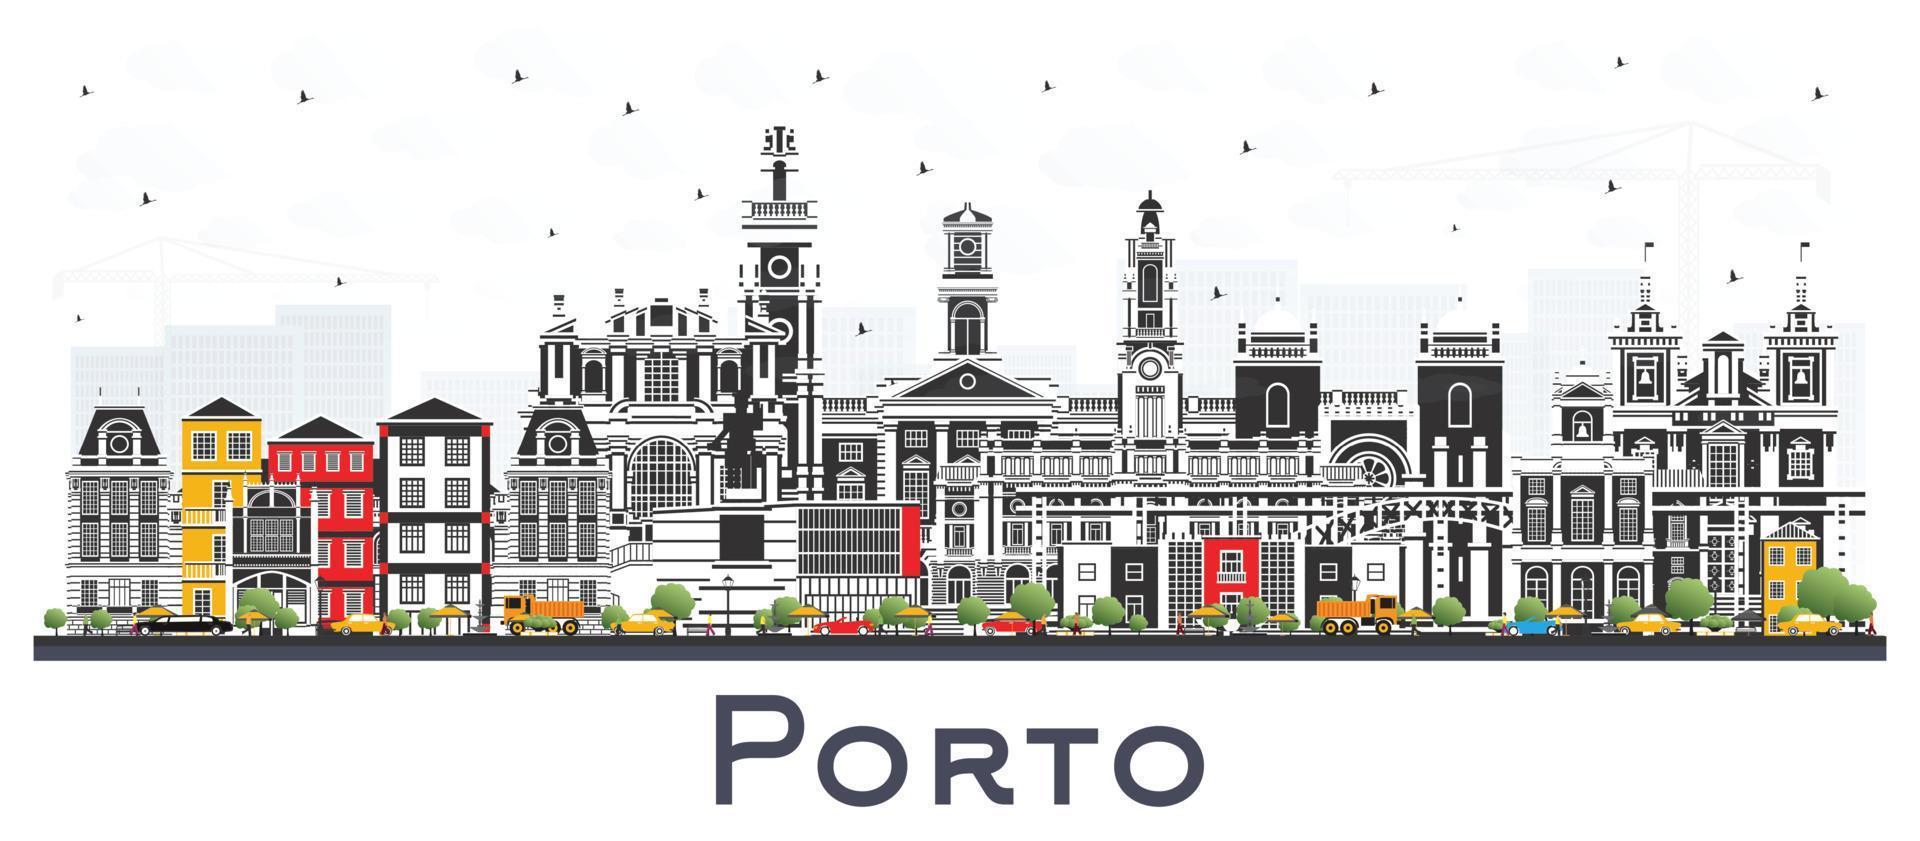 Porto Portugal City Skyline with Color Buildings Isolated on White. vector